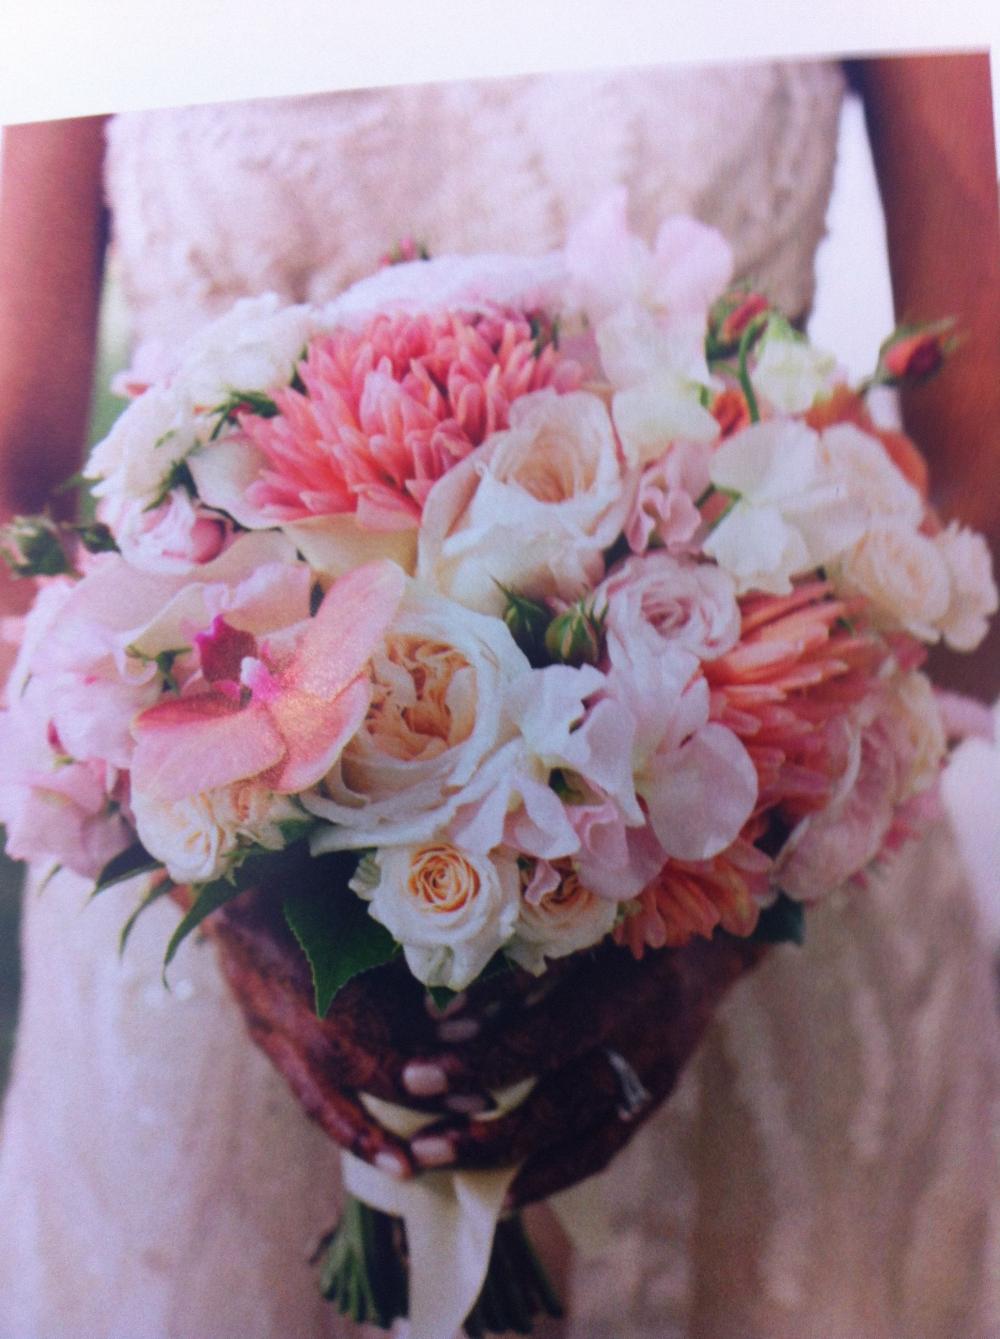 Post your bouquet and inspiration pics here